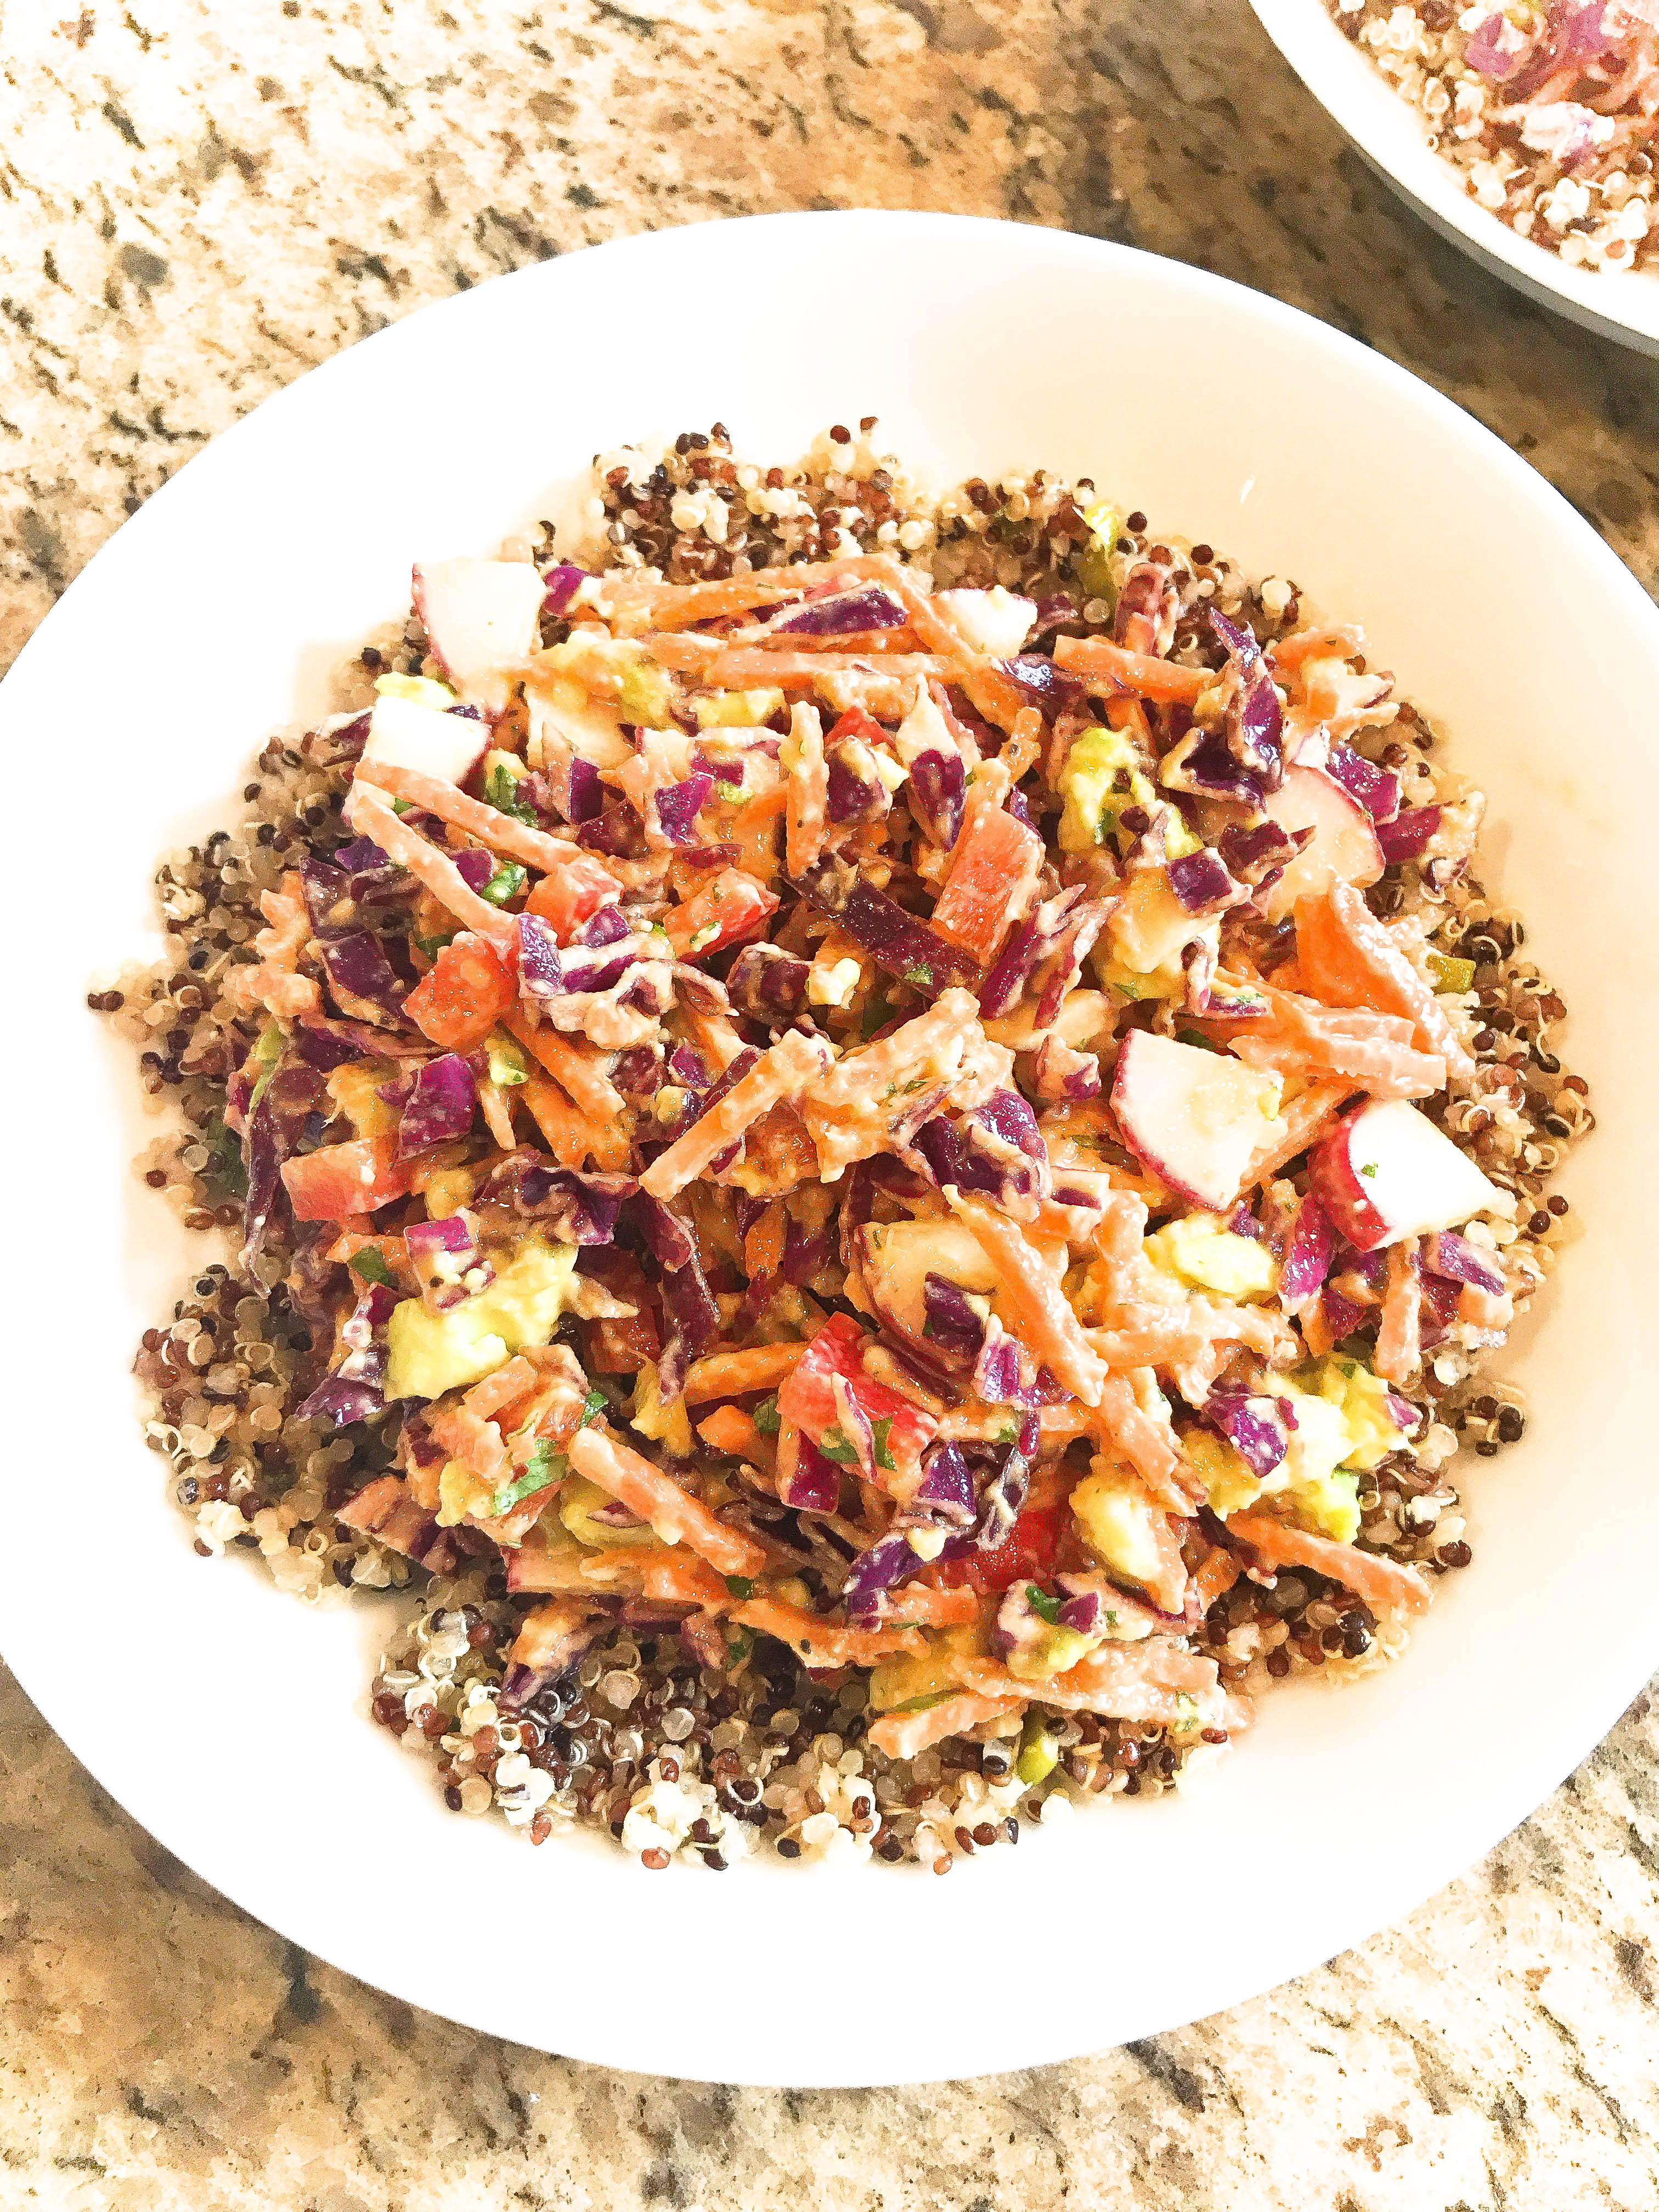 Vegan Red Curry Quinoa Salad - Tri-color quinoa piled with cabbage, carrots, red bell pepper, radishes, scallions, and avocado tossed in red curry sauce. via @thiswifecooks